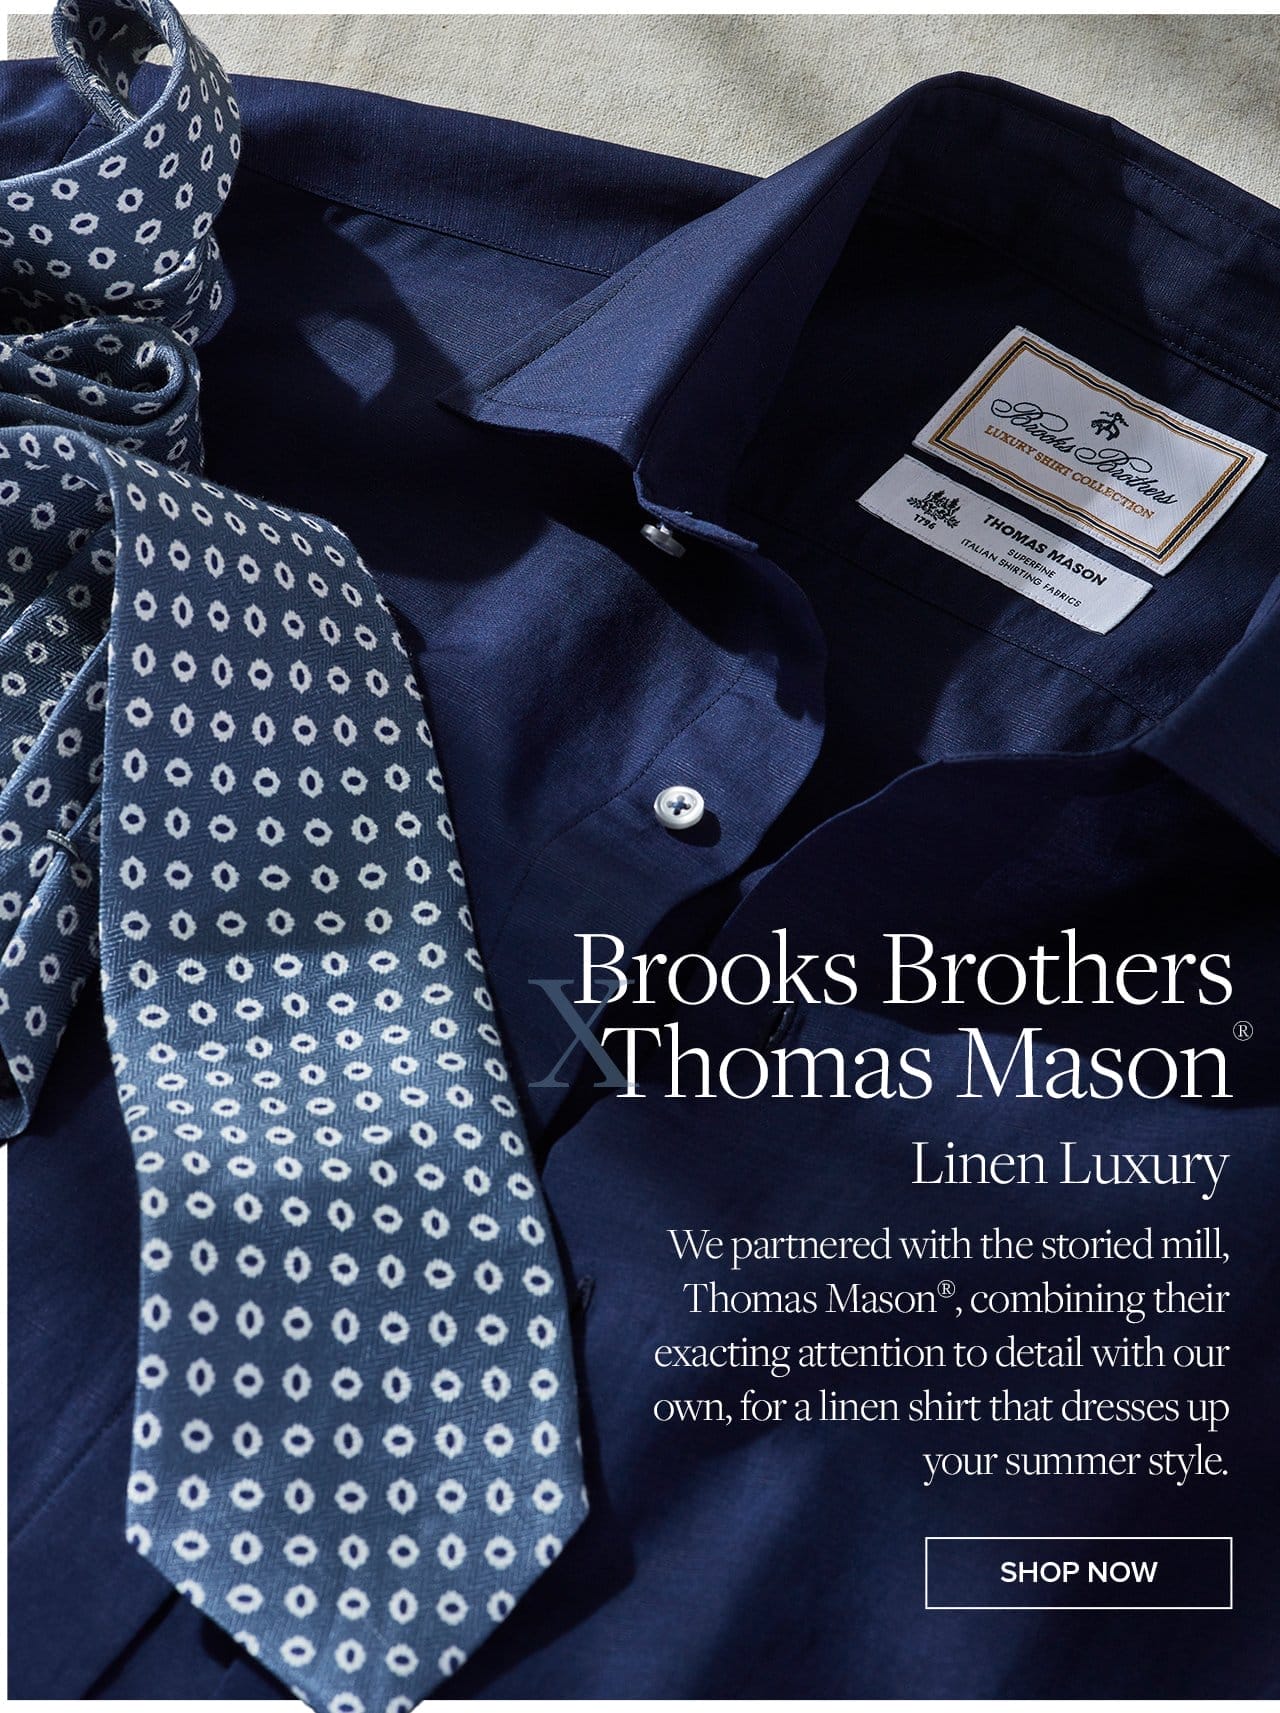 Brooks Brothers Thomas Mason Linen Luxury We partnered with the storied mill, Thomas Mason, combining their exacting attention to detail with our own, for a linen shirt that dresses up your summer style. Shop Now